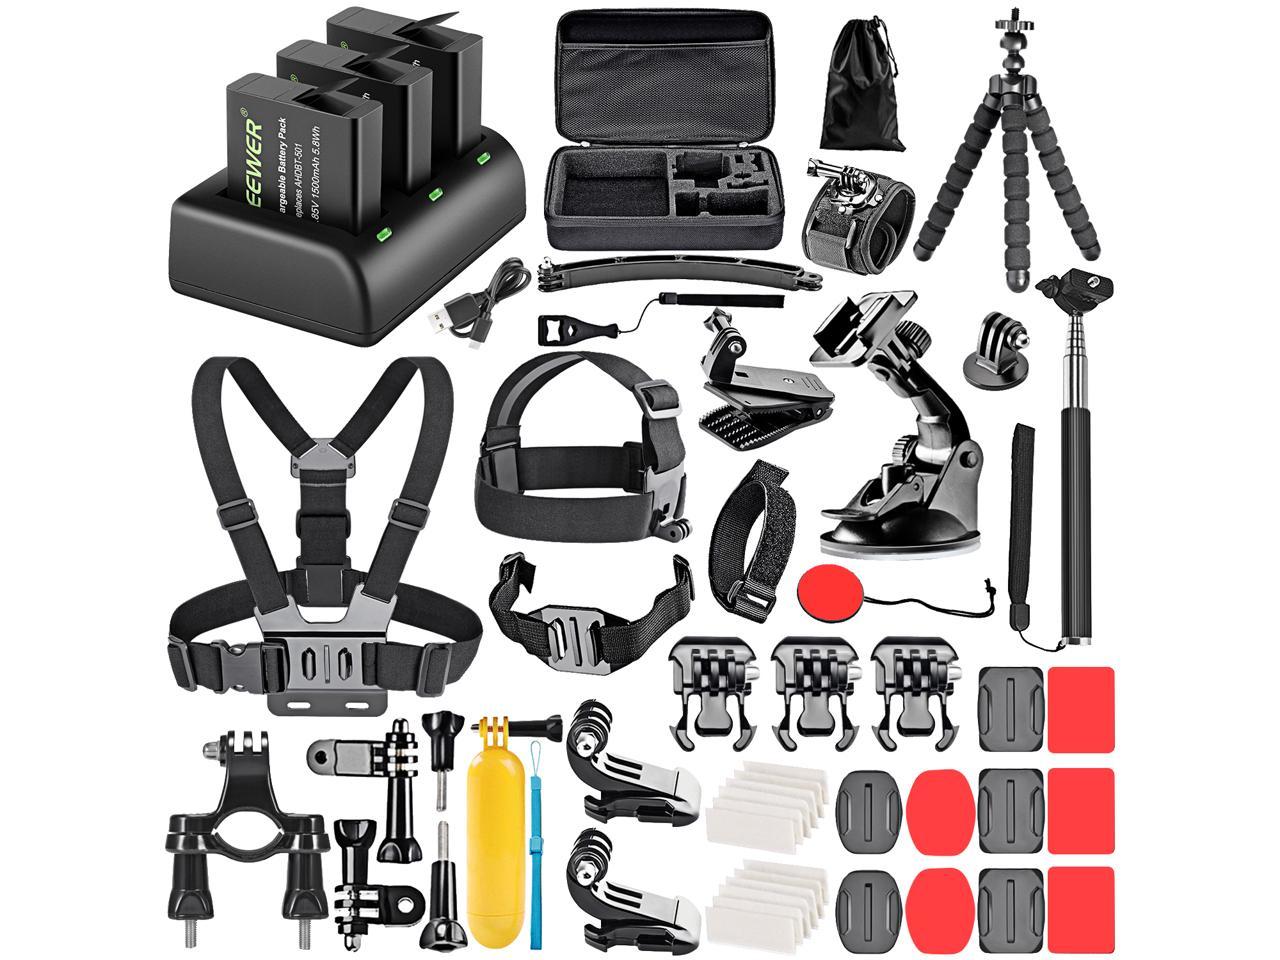 Neewer 50-In-1 Action Camera Accessory Kit for GoPro 8 GoPro Hero 7 6 5 4 3+ 